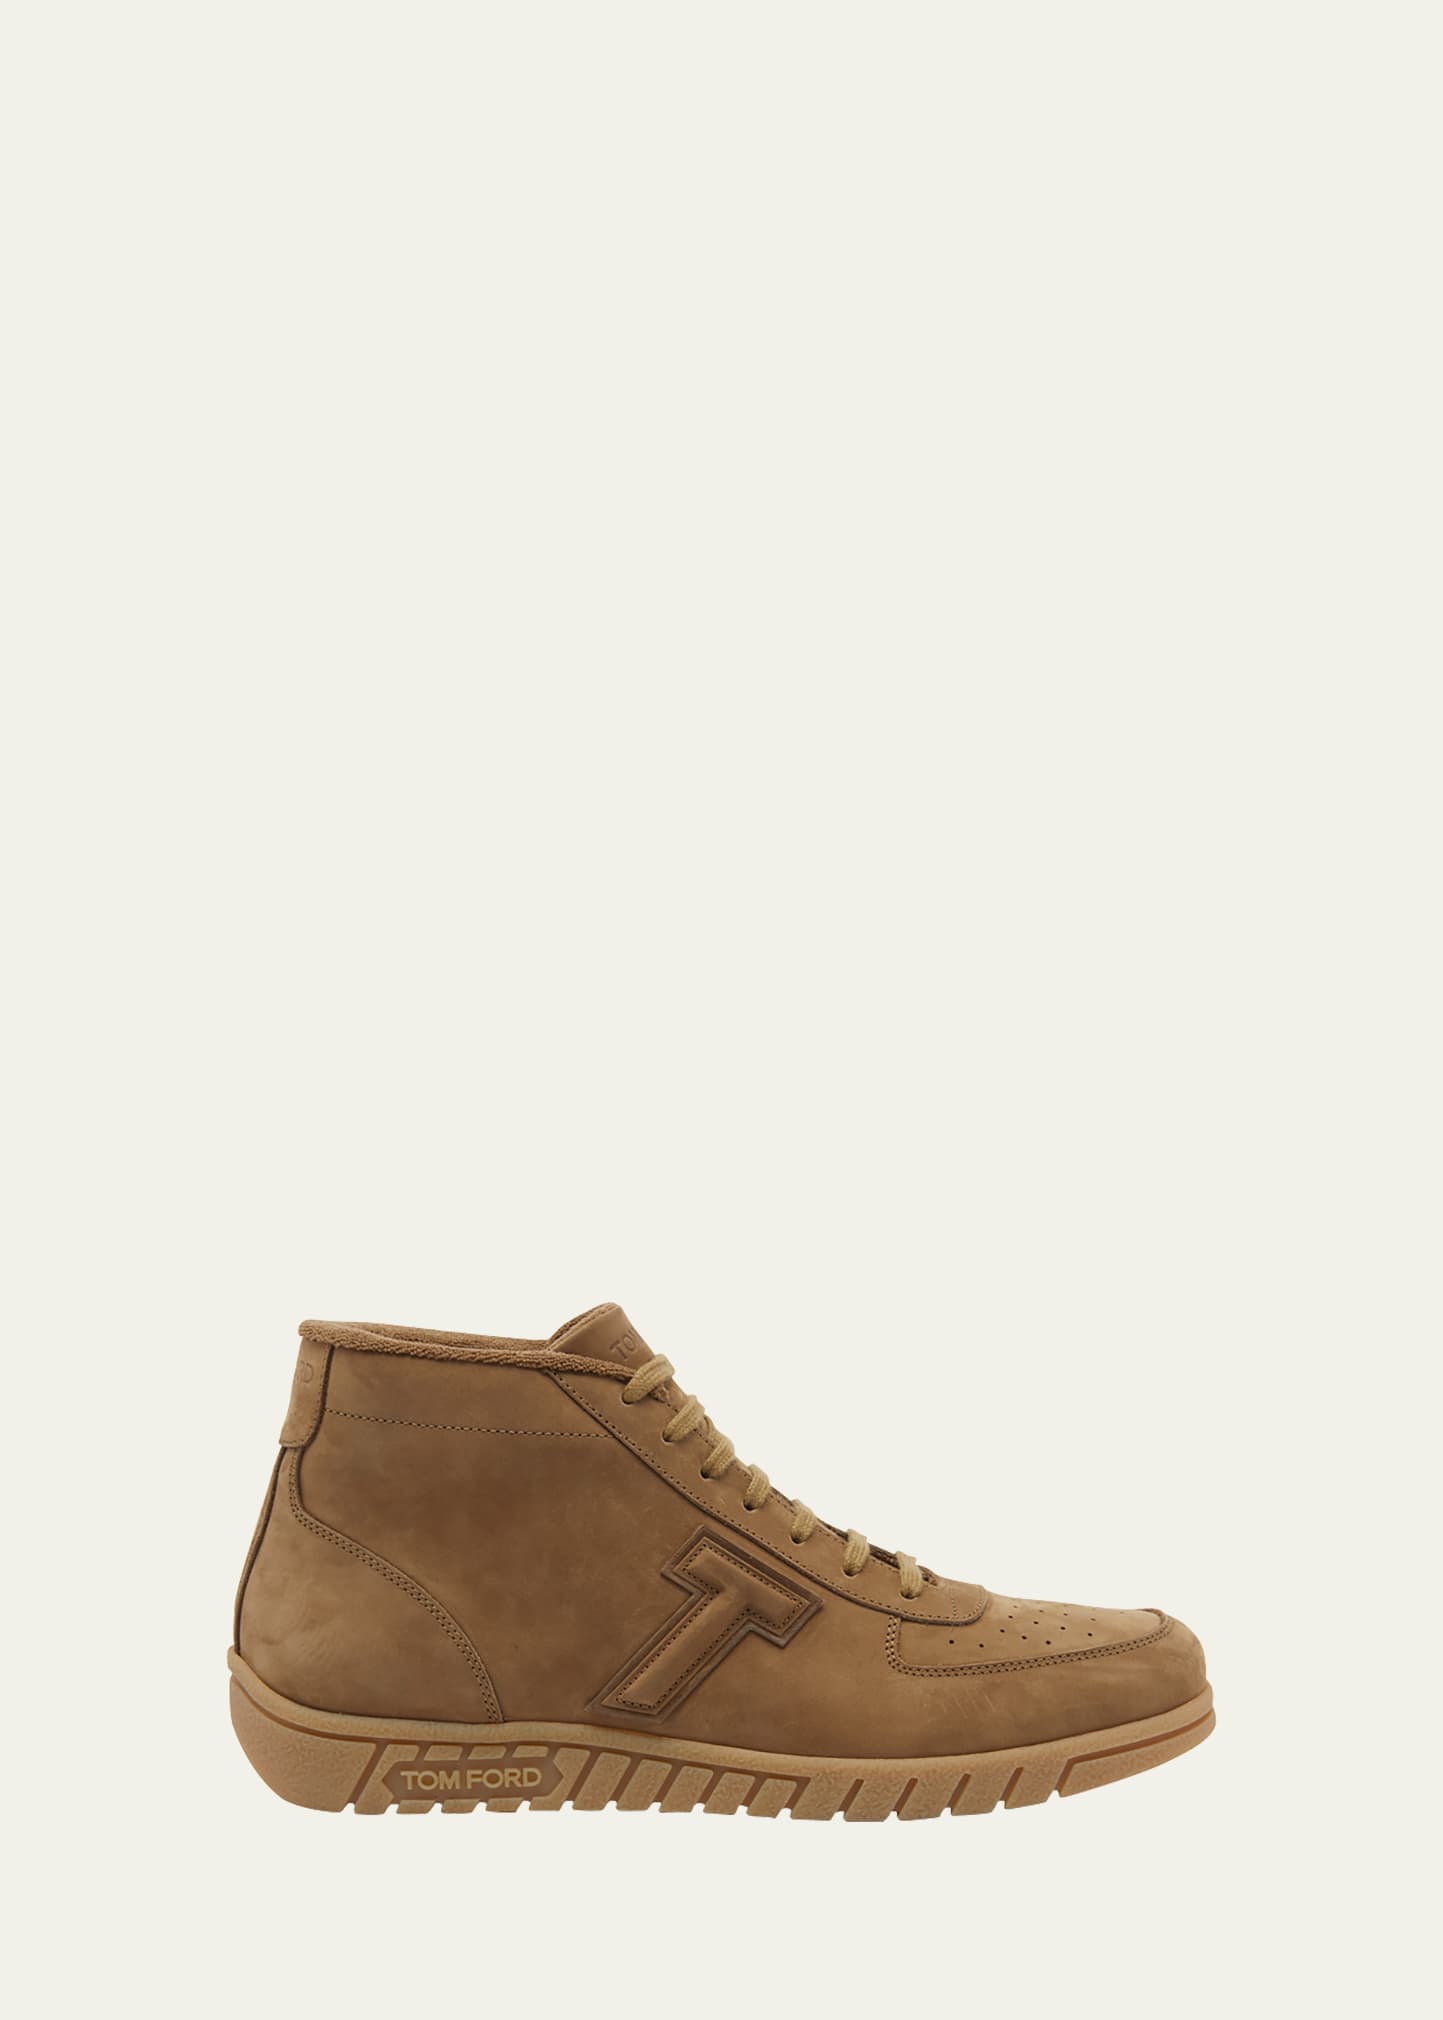 Tom Ford Men's Connor Suede Tonal High-top Sneakers In Dark Sand